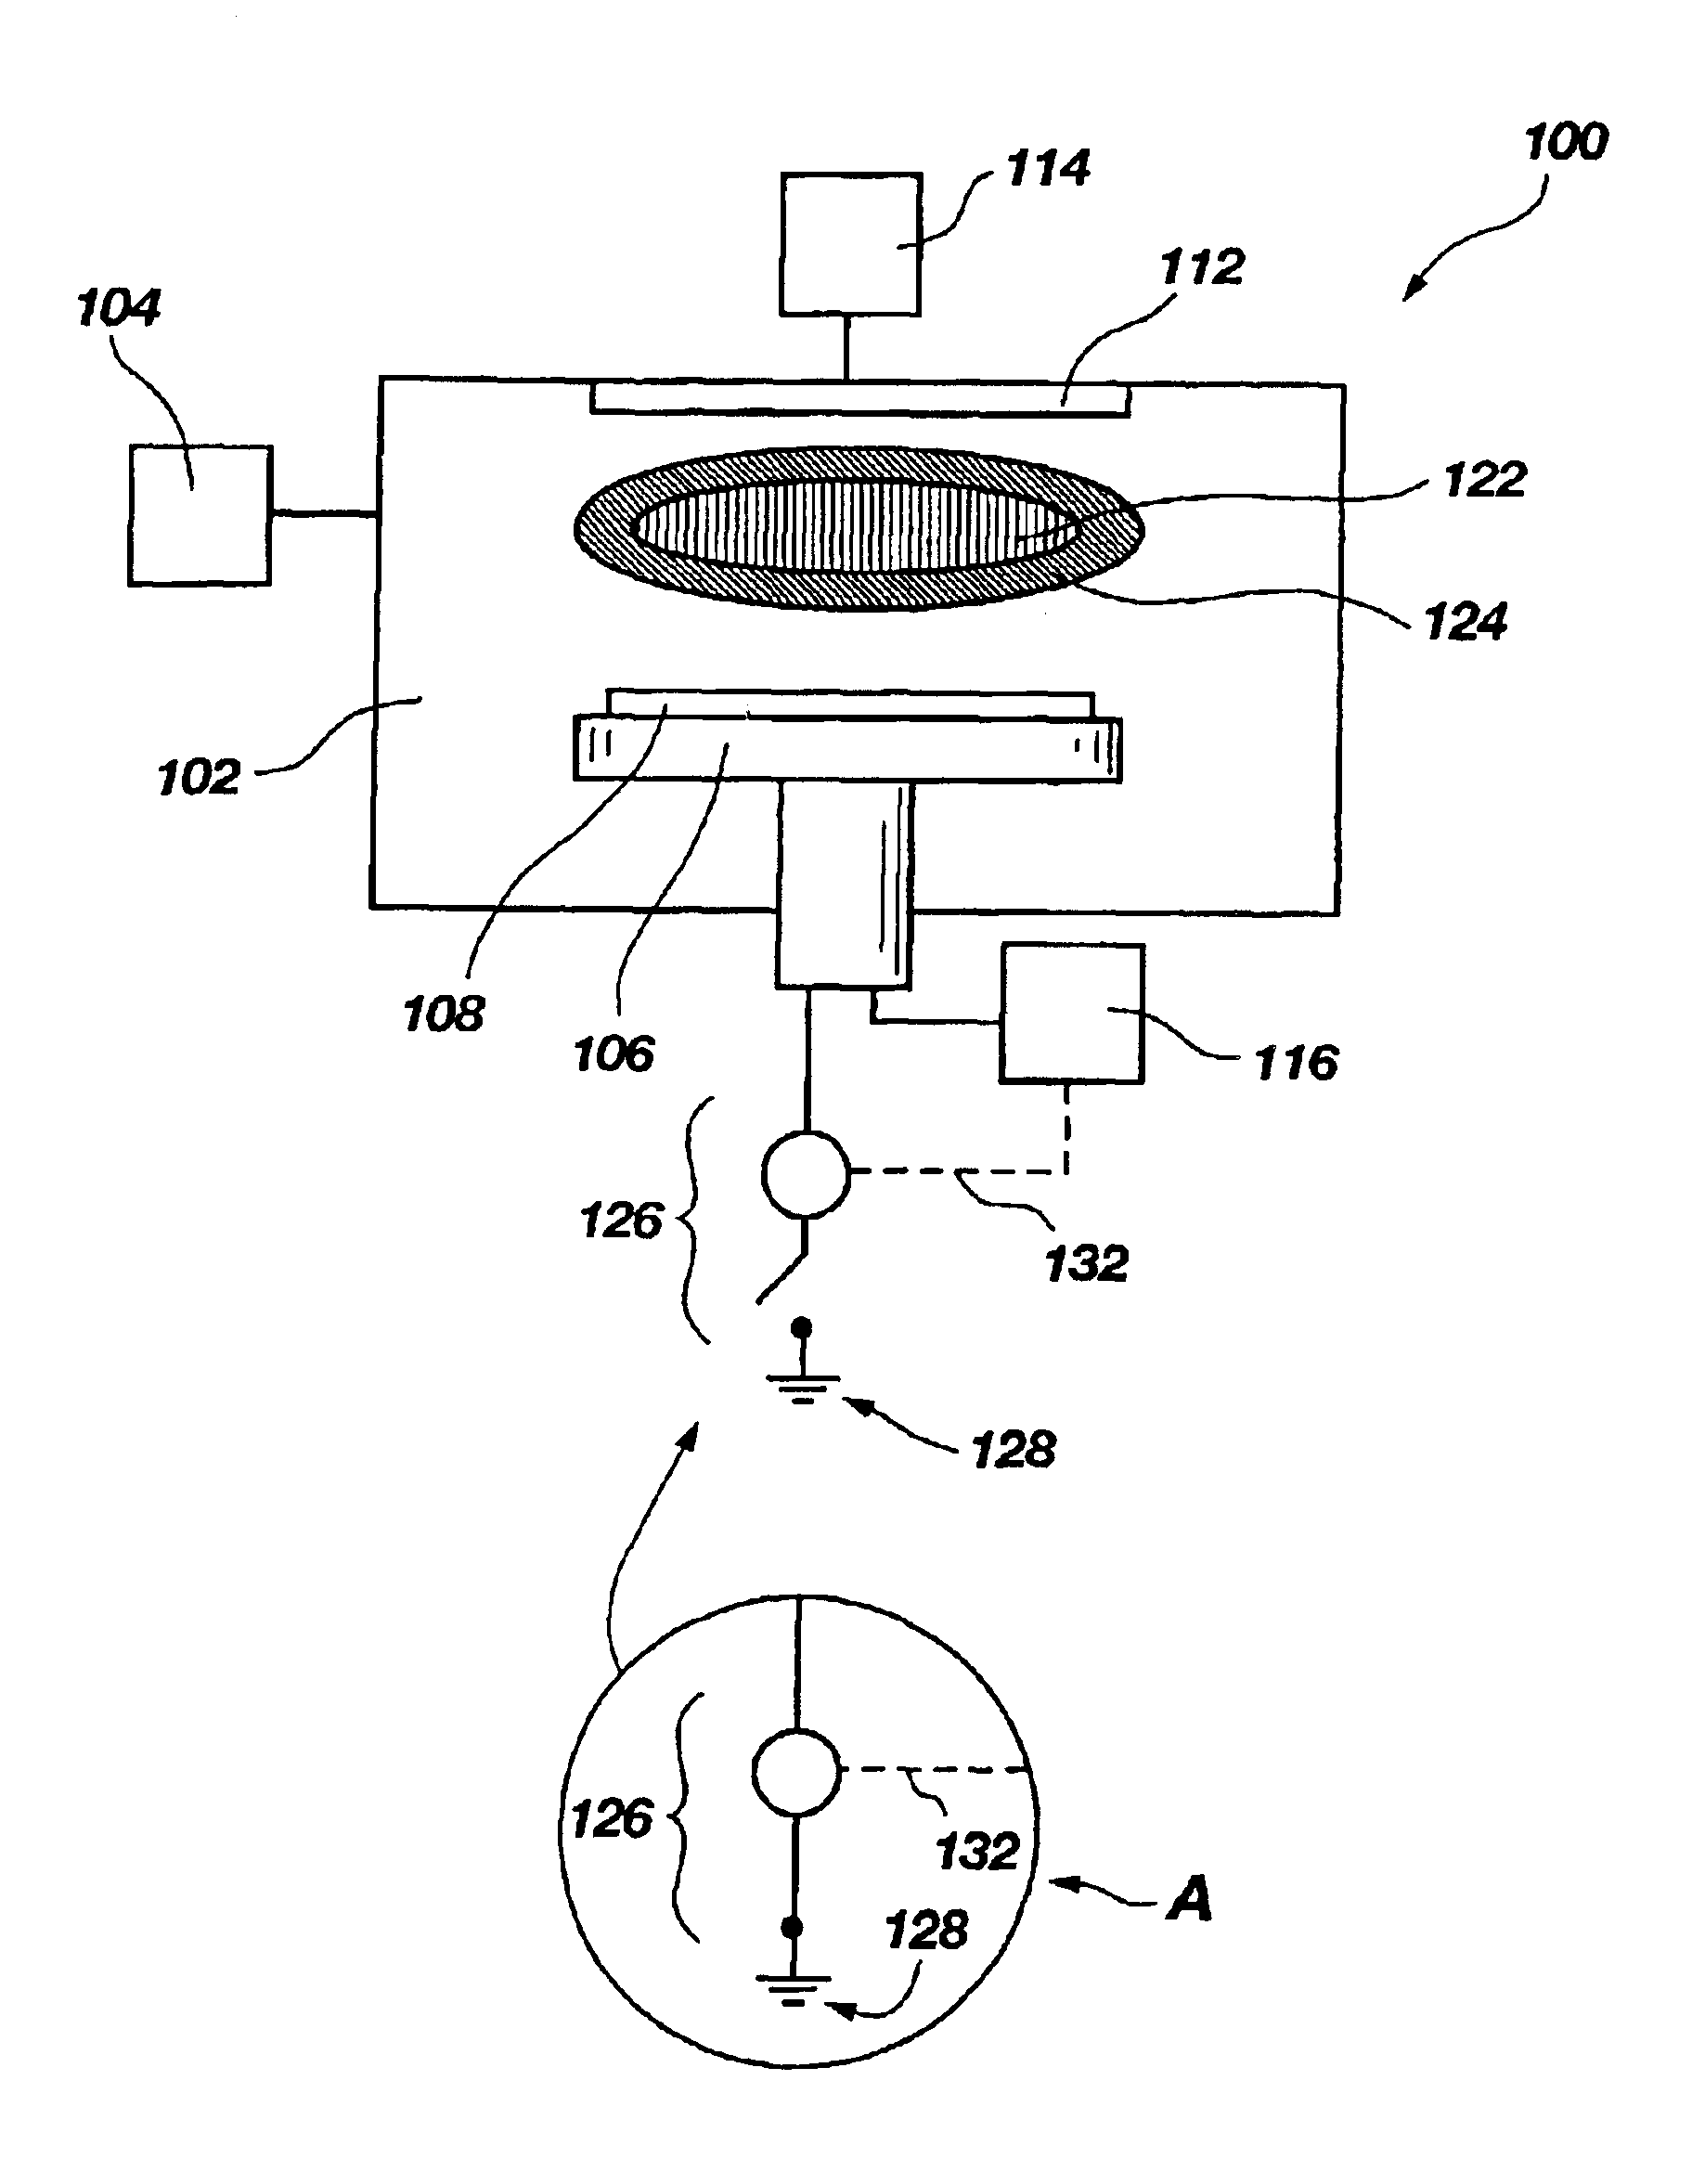 Use of pulsed grounding source in a plasma reactor